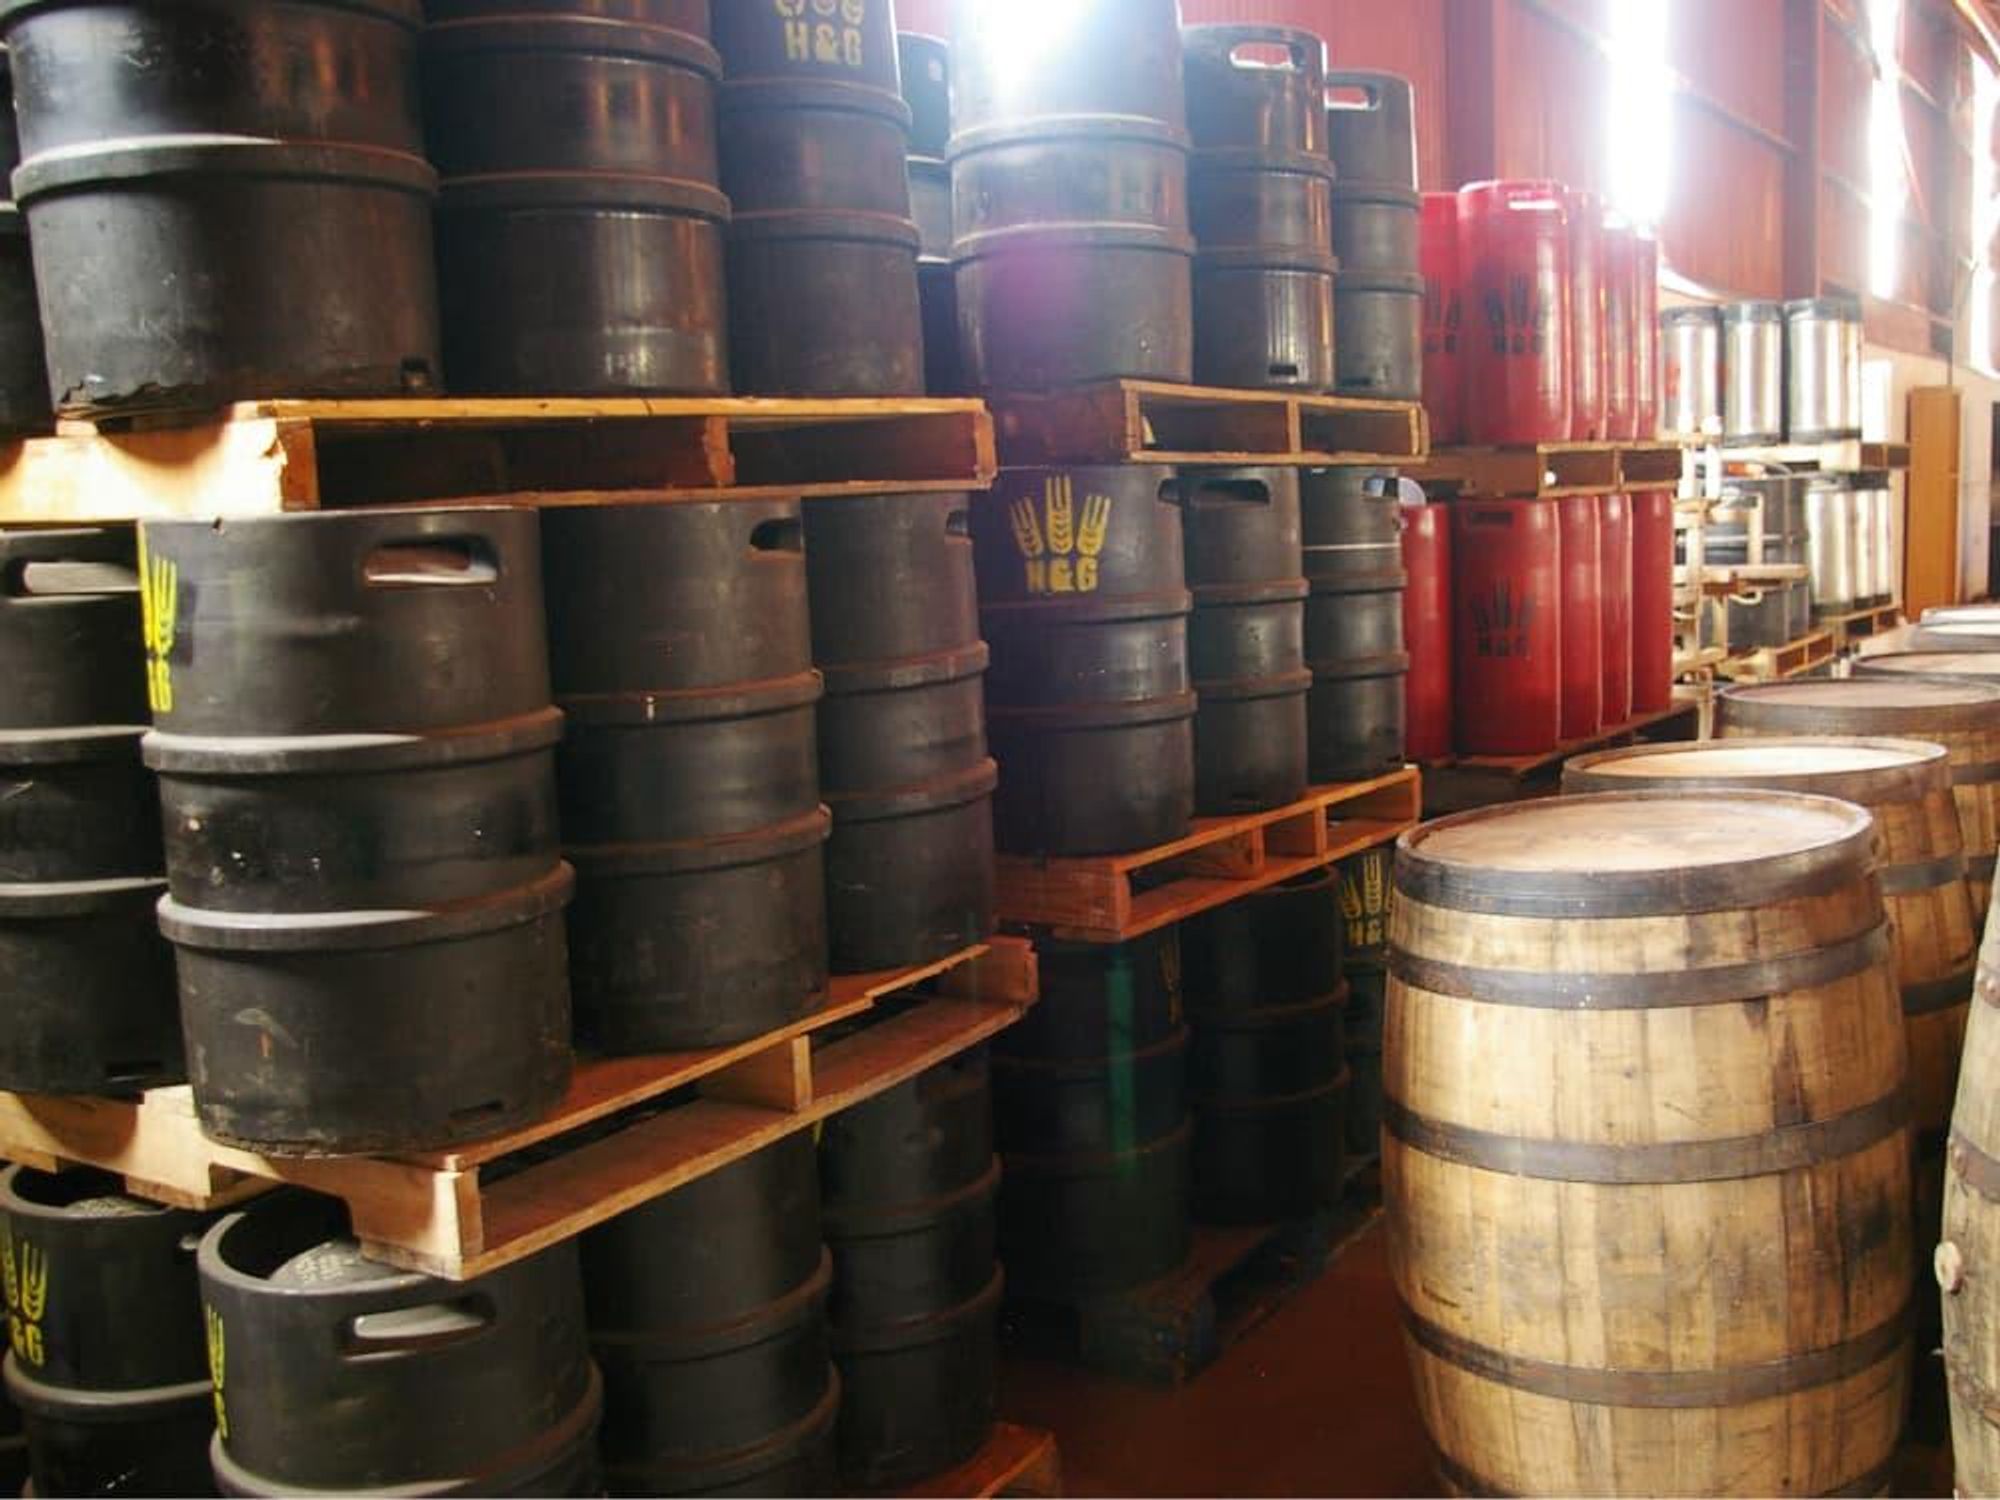 Hops and Grain brewing storage with barrels and kegs